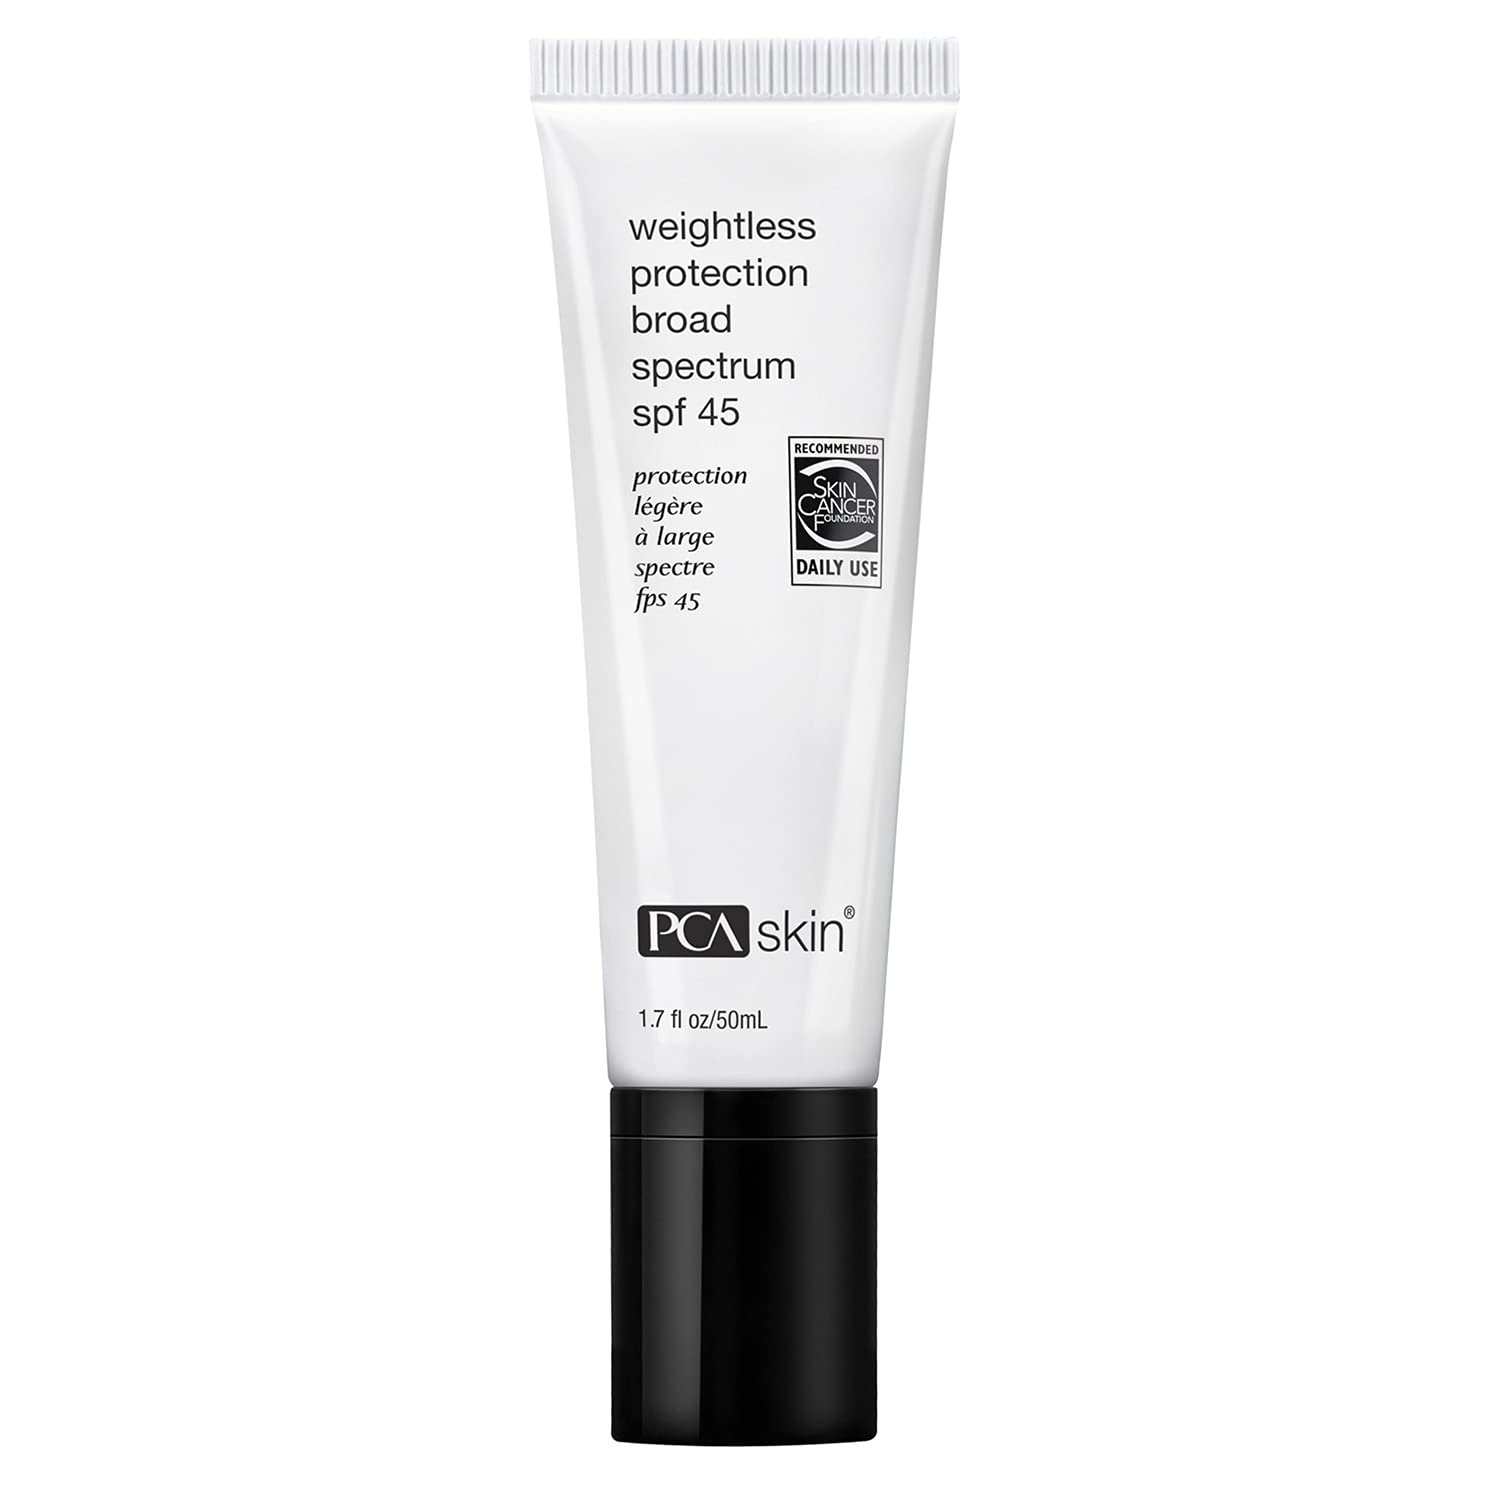 Weightless Protection Broad Spectrum SPF 45 - PCA Skin